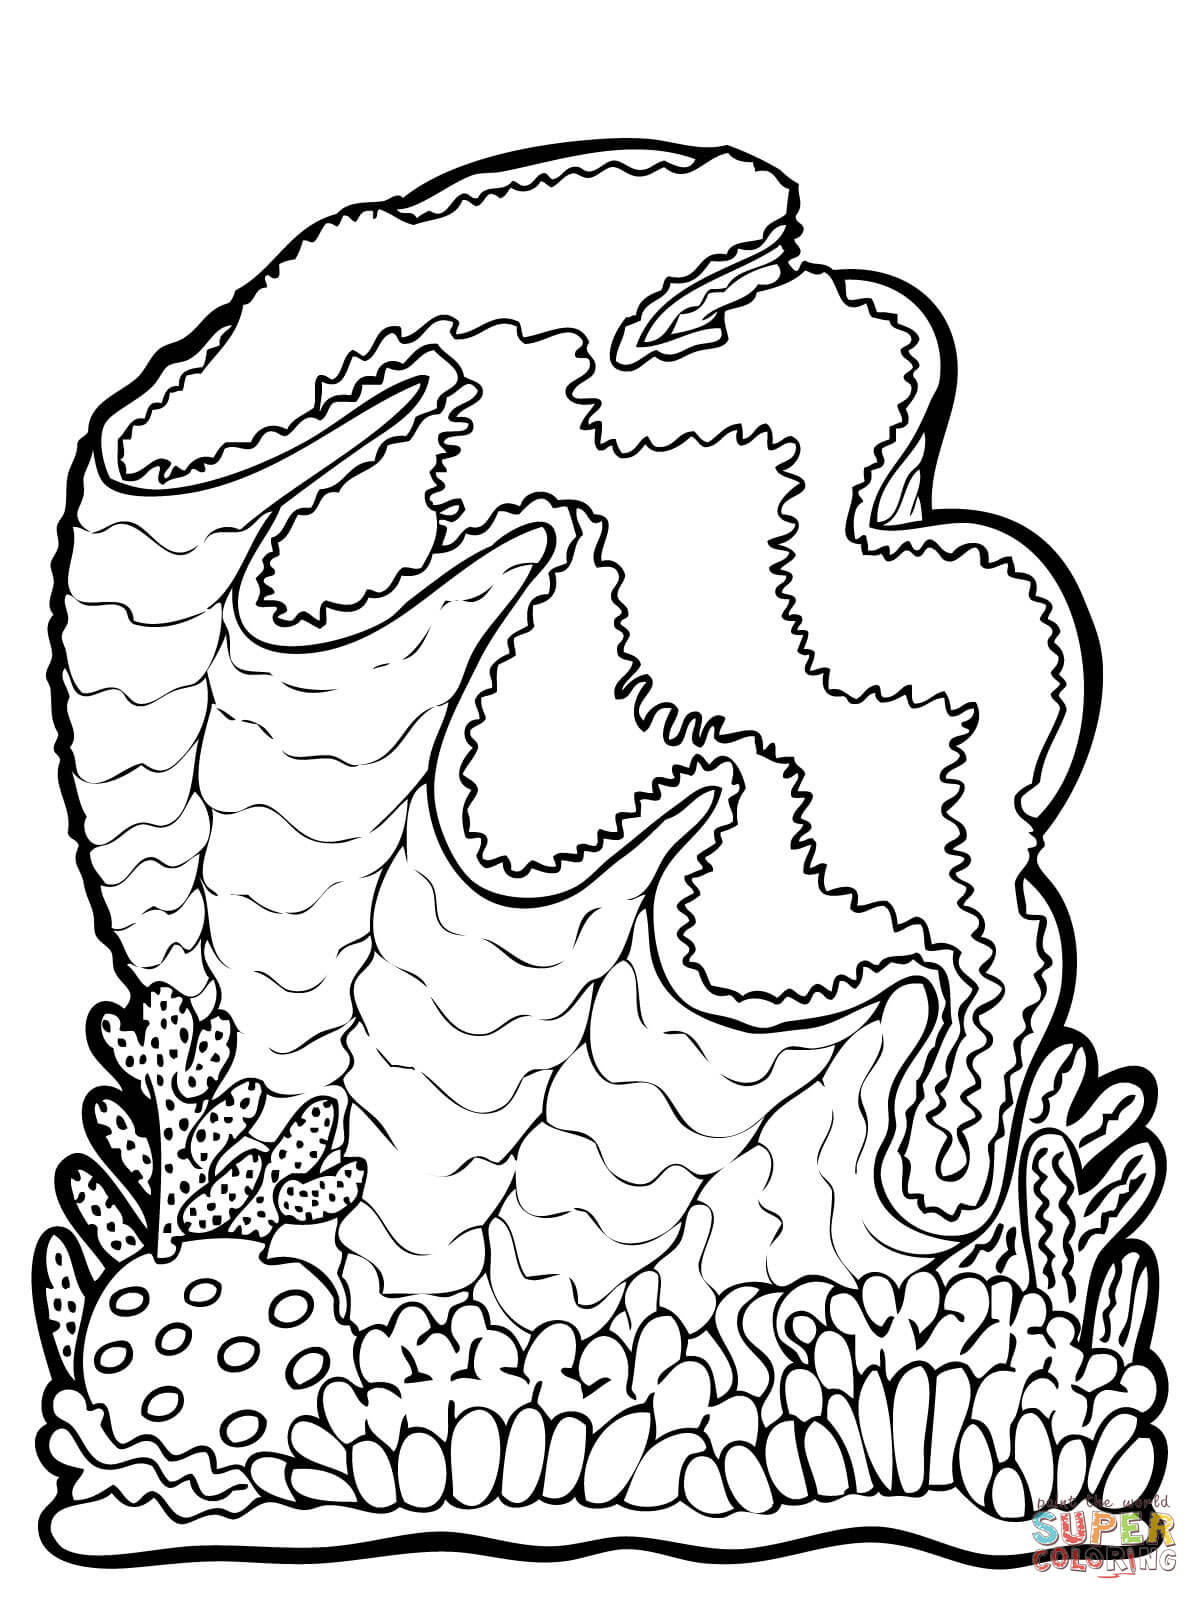 Giant Clam coloring page | Free Printable Coloring Pages